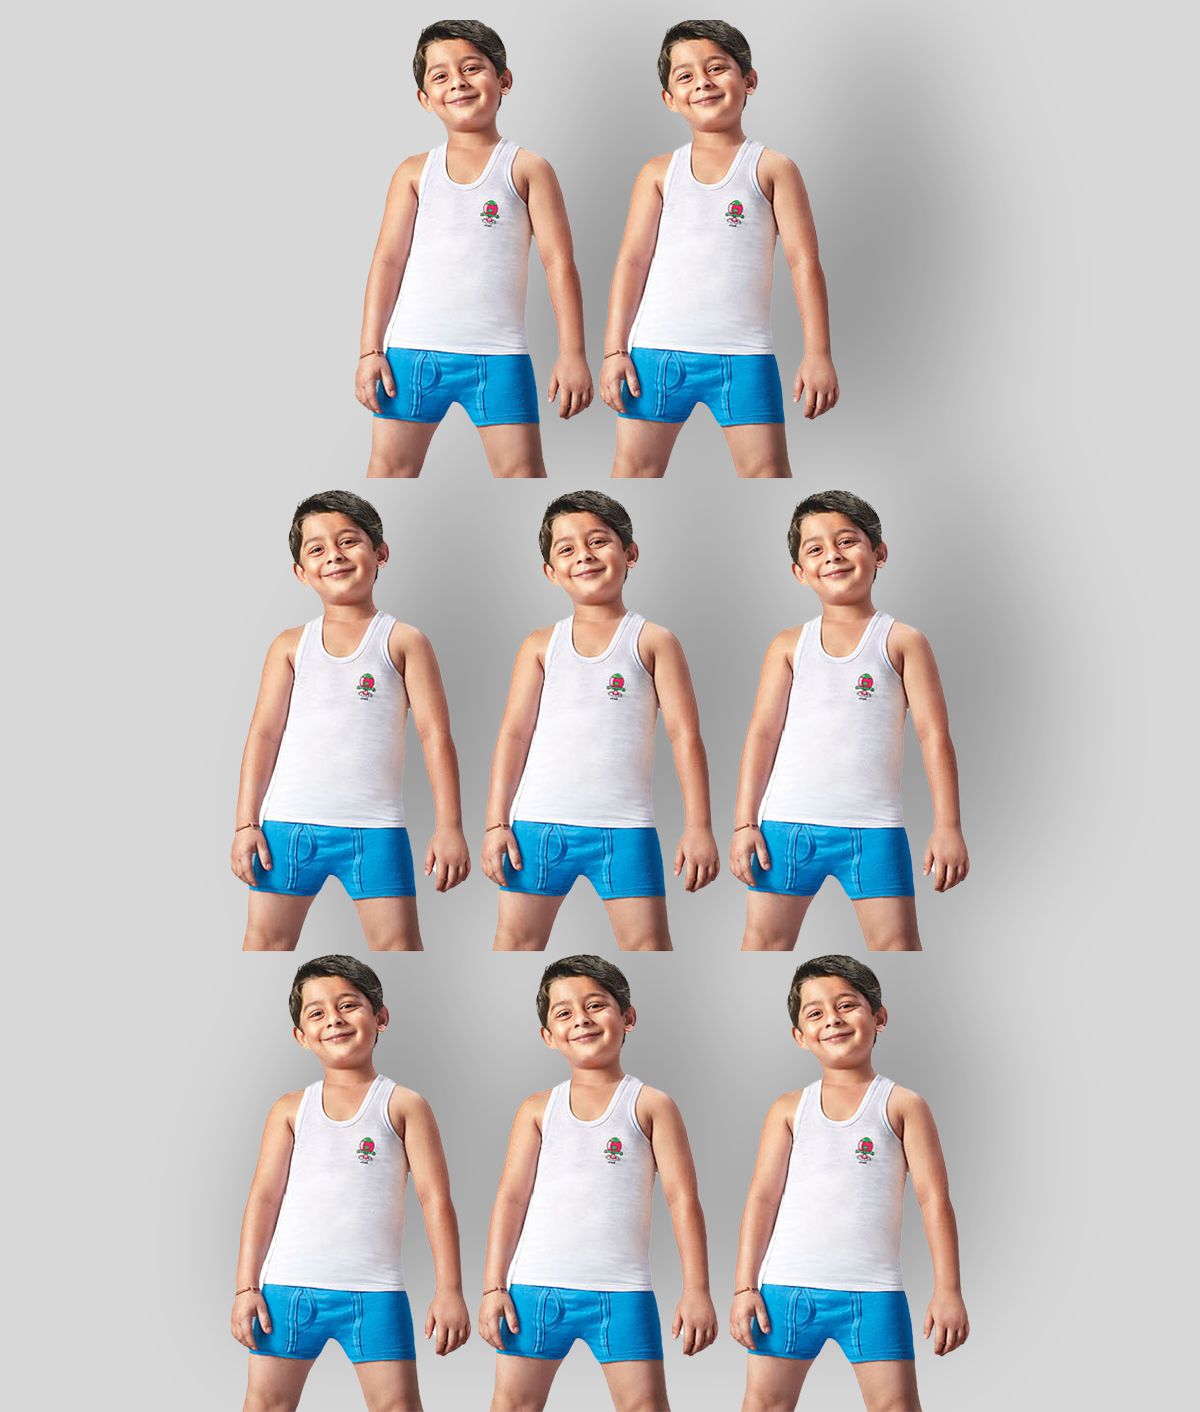     			Dixcy Josh Fine Cotton White Sleeveless Vests for Kids/Boys - Pack of 8